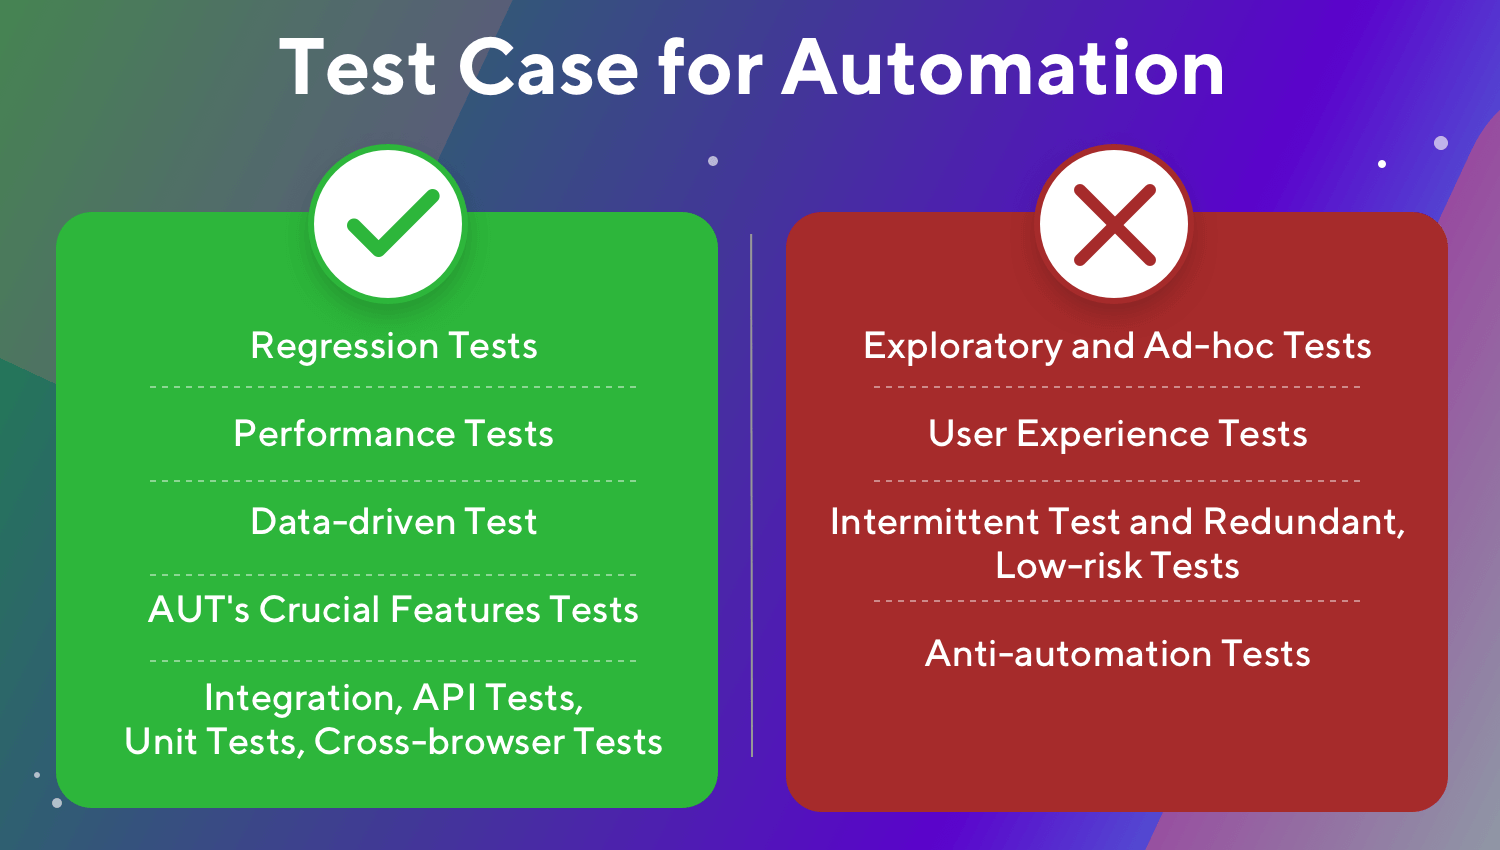 Test Case to Automate